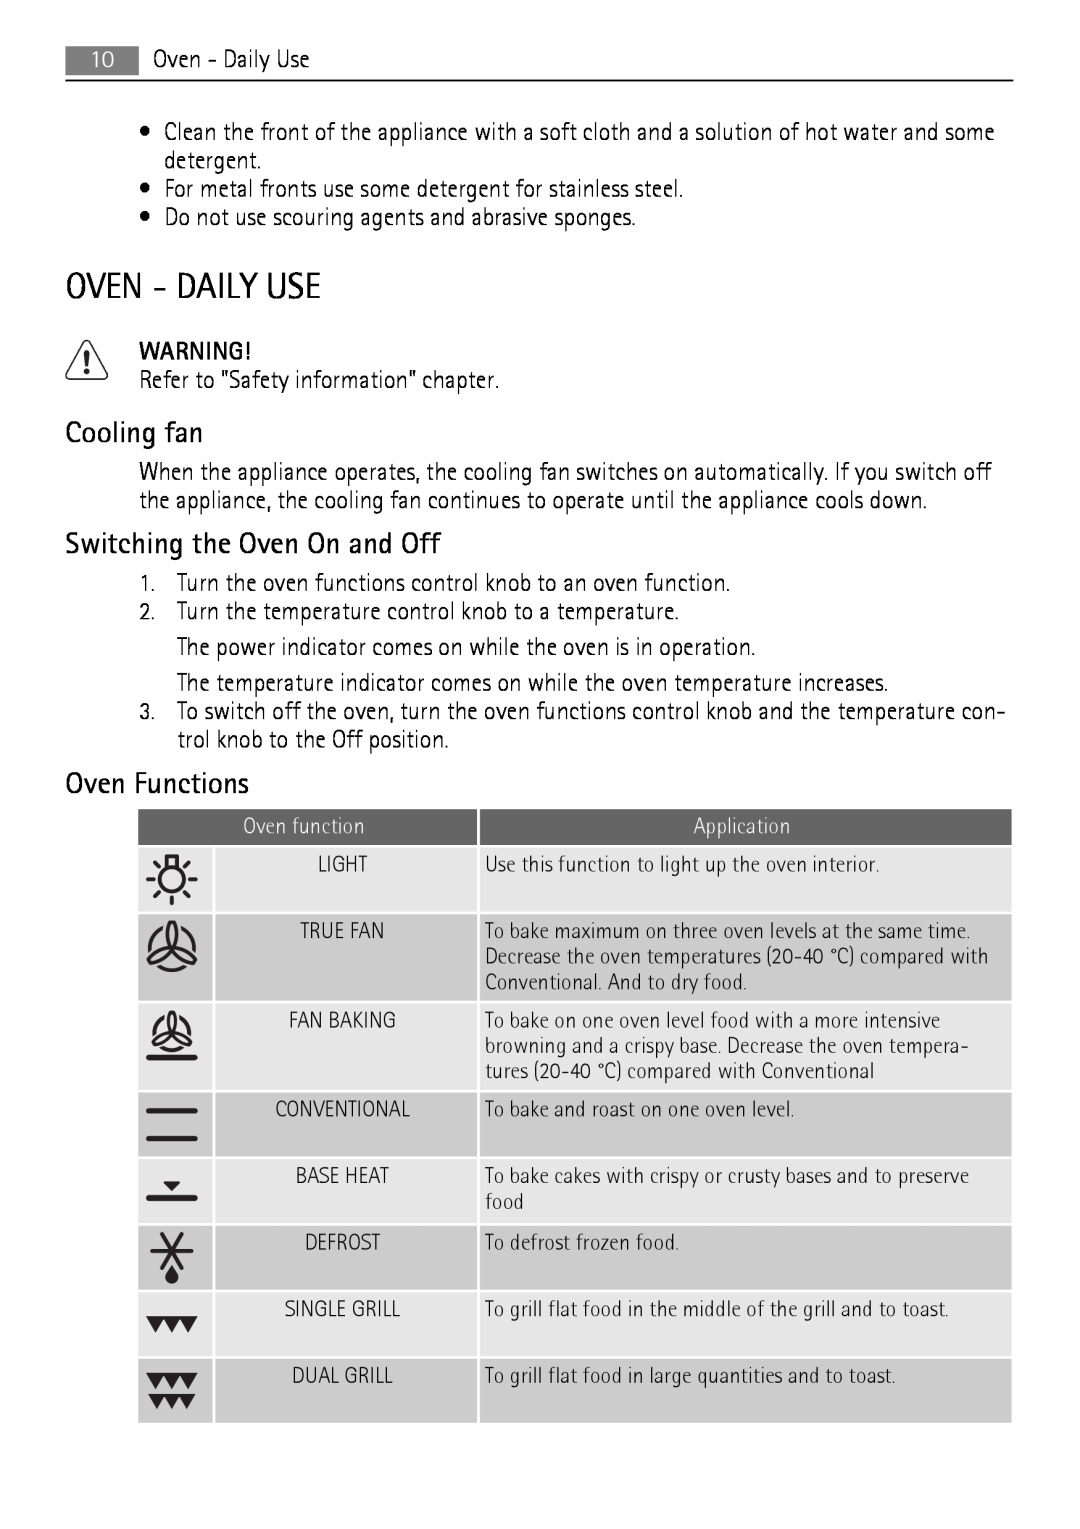 Electrolux 40036VI-WN user manual Oven - Daily Use, Cooling fan, Switching the Oven On and Off, Oven Functions 